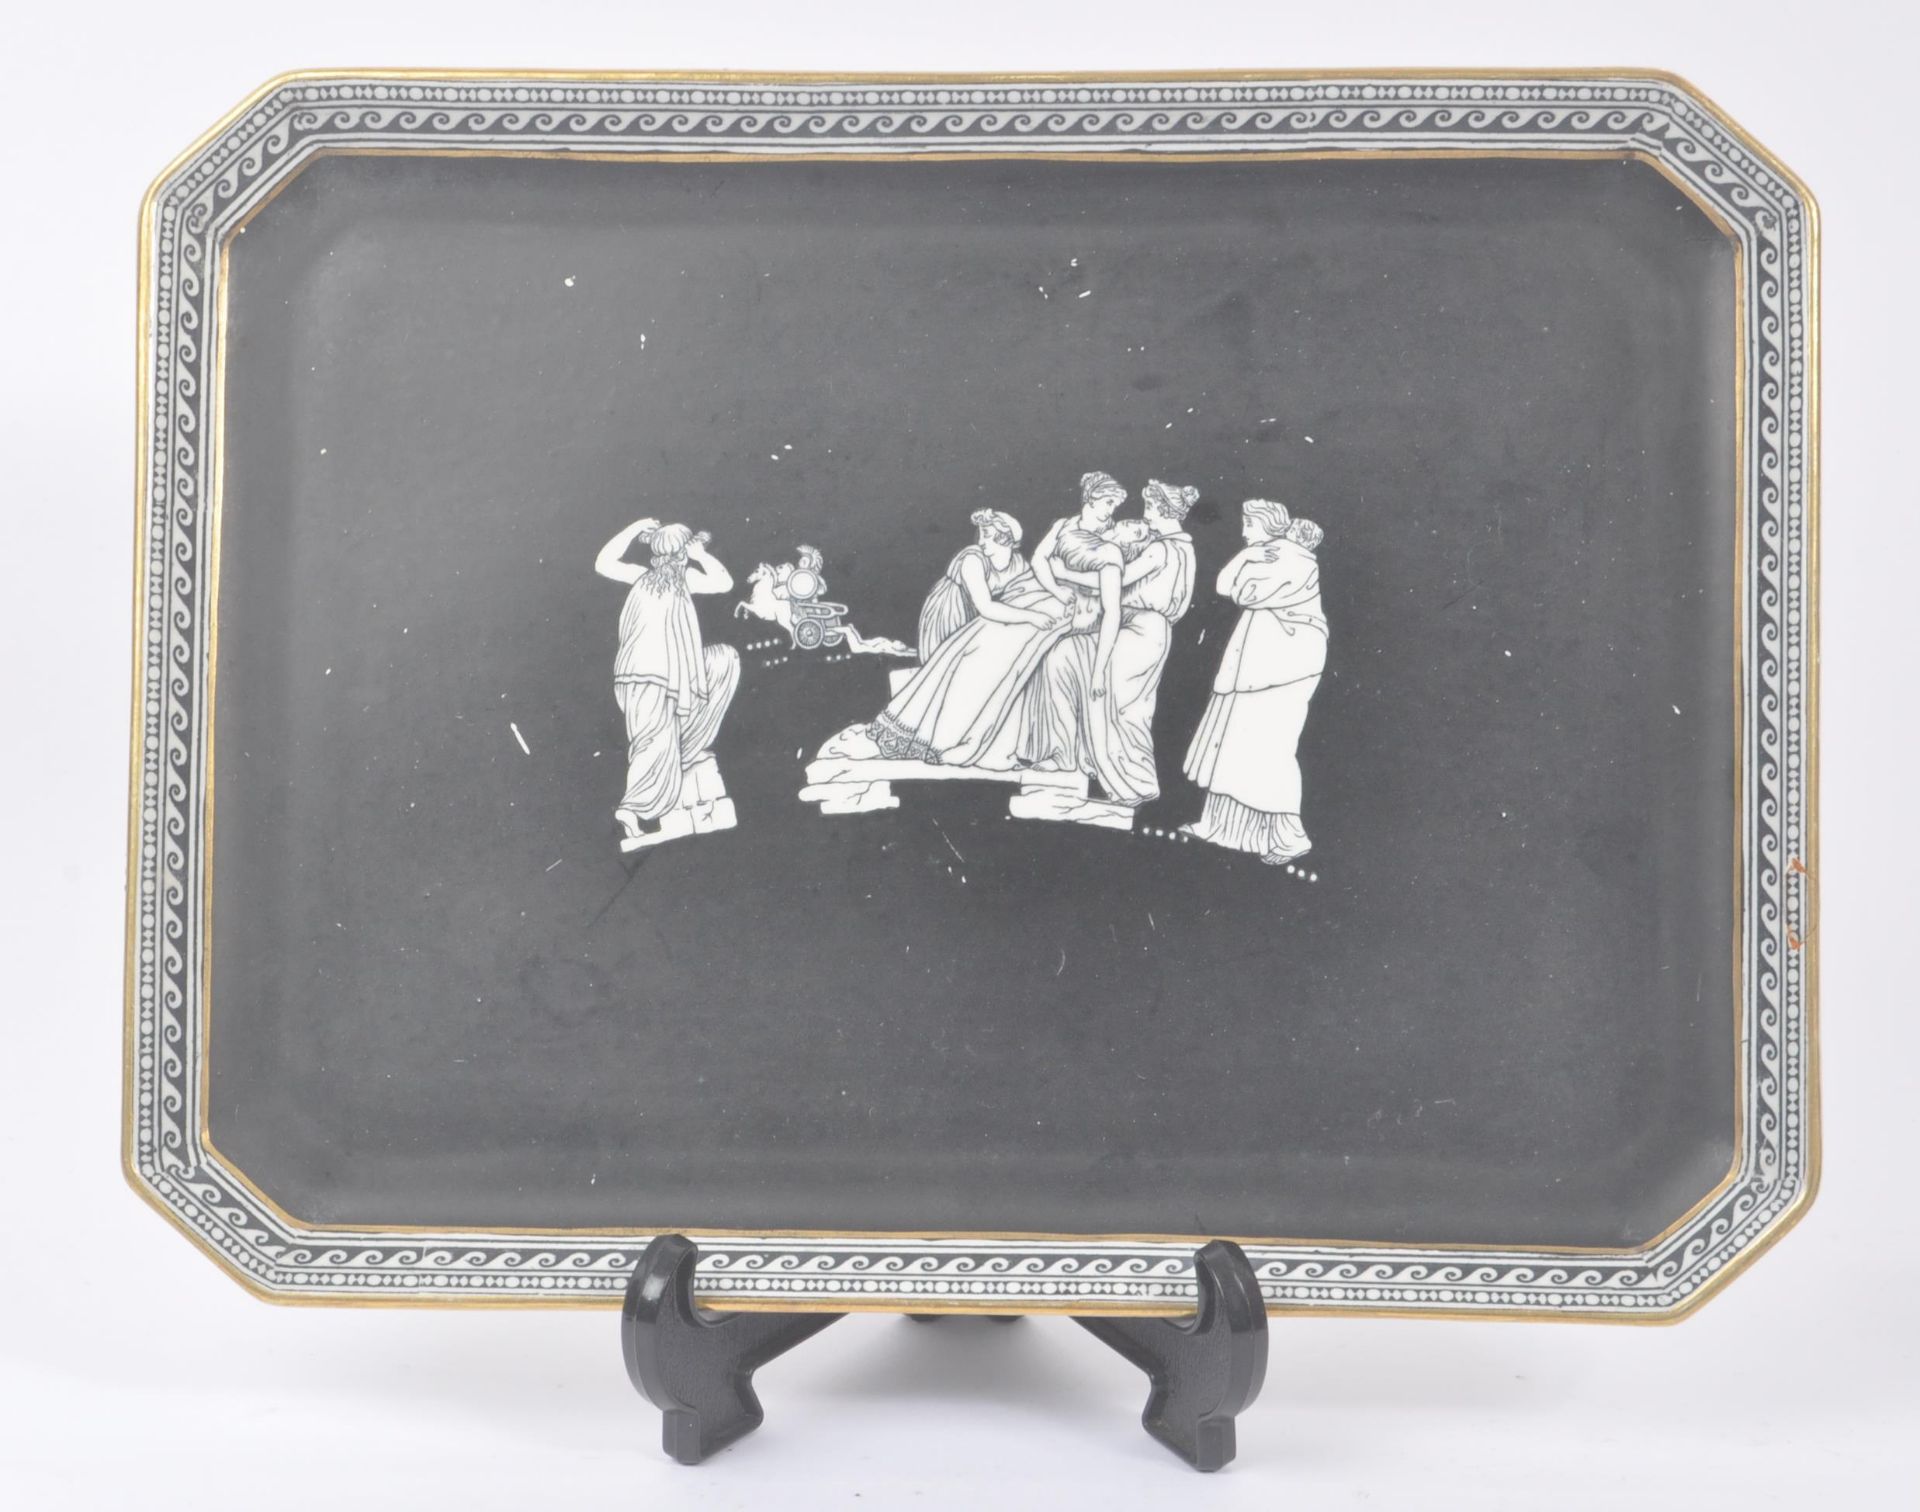 F & R PRATT - COLLECTION OF CHINA ITEMS WITH OLD GREEK DECOR - Image 4 of 6